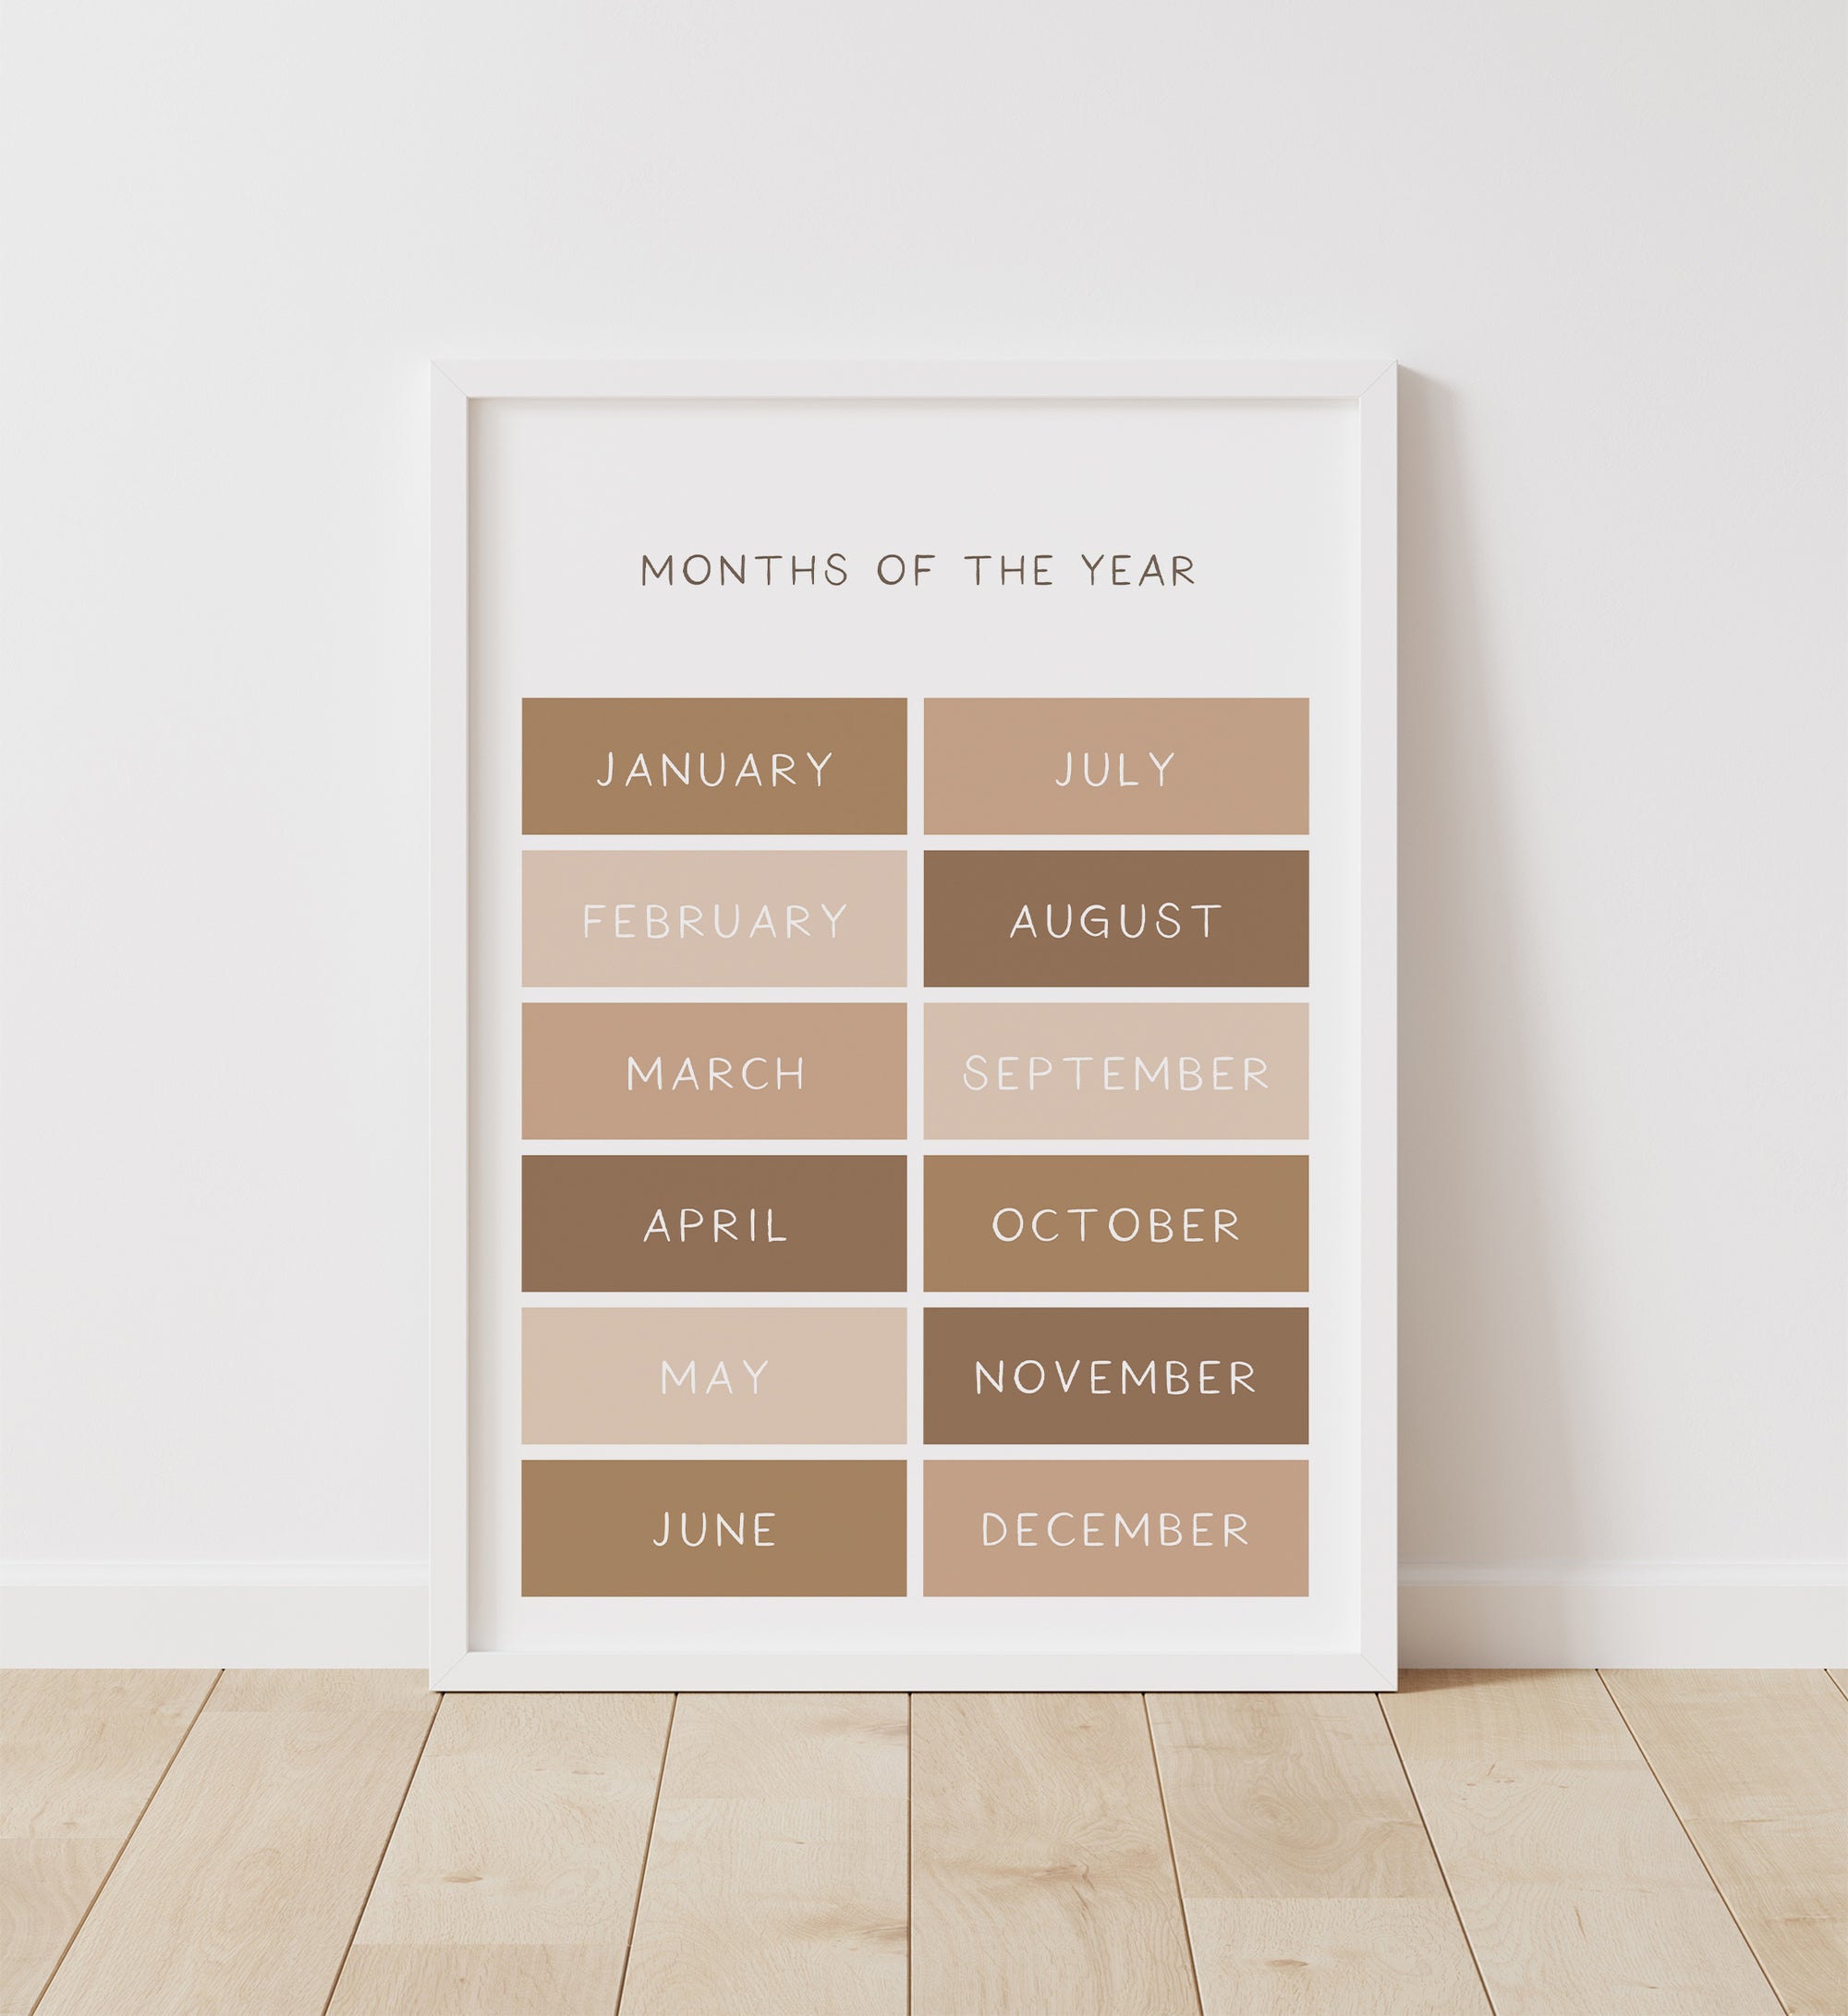 Months of the Year Print - BRCP